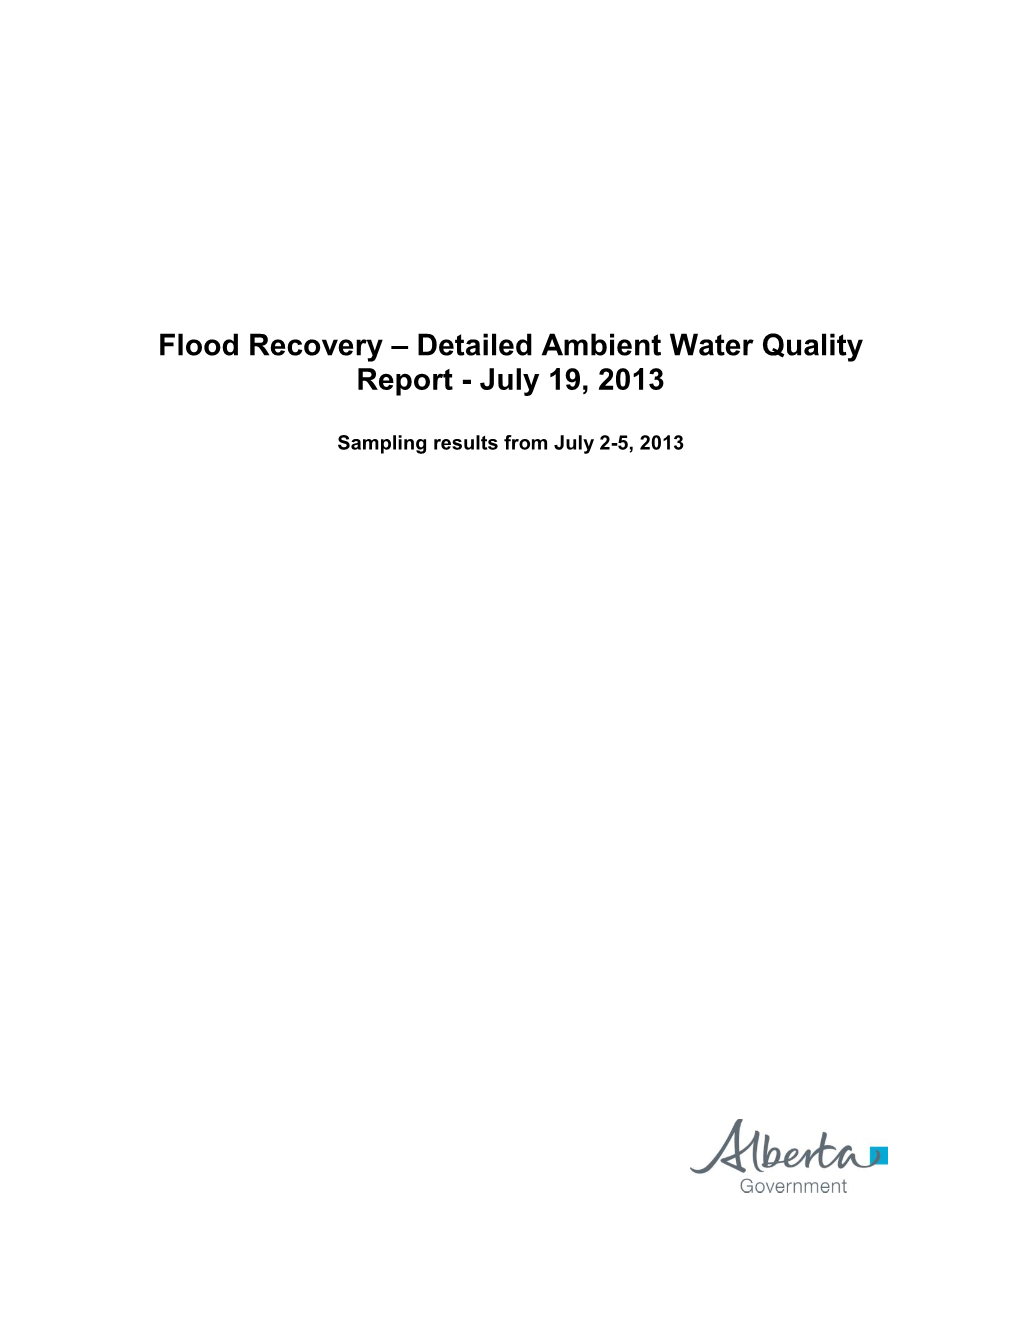 Flood Recovery – Detailed Ambient Water Quality Report - July 19, 2013